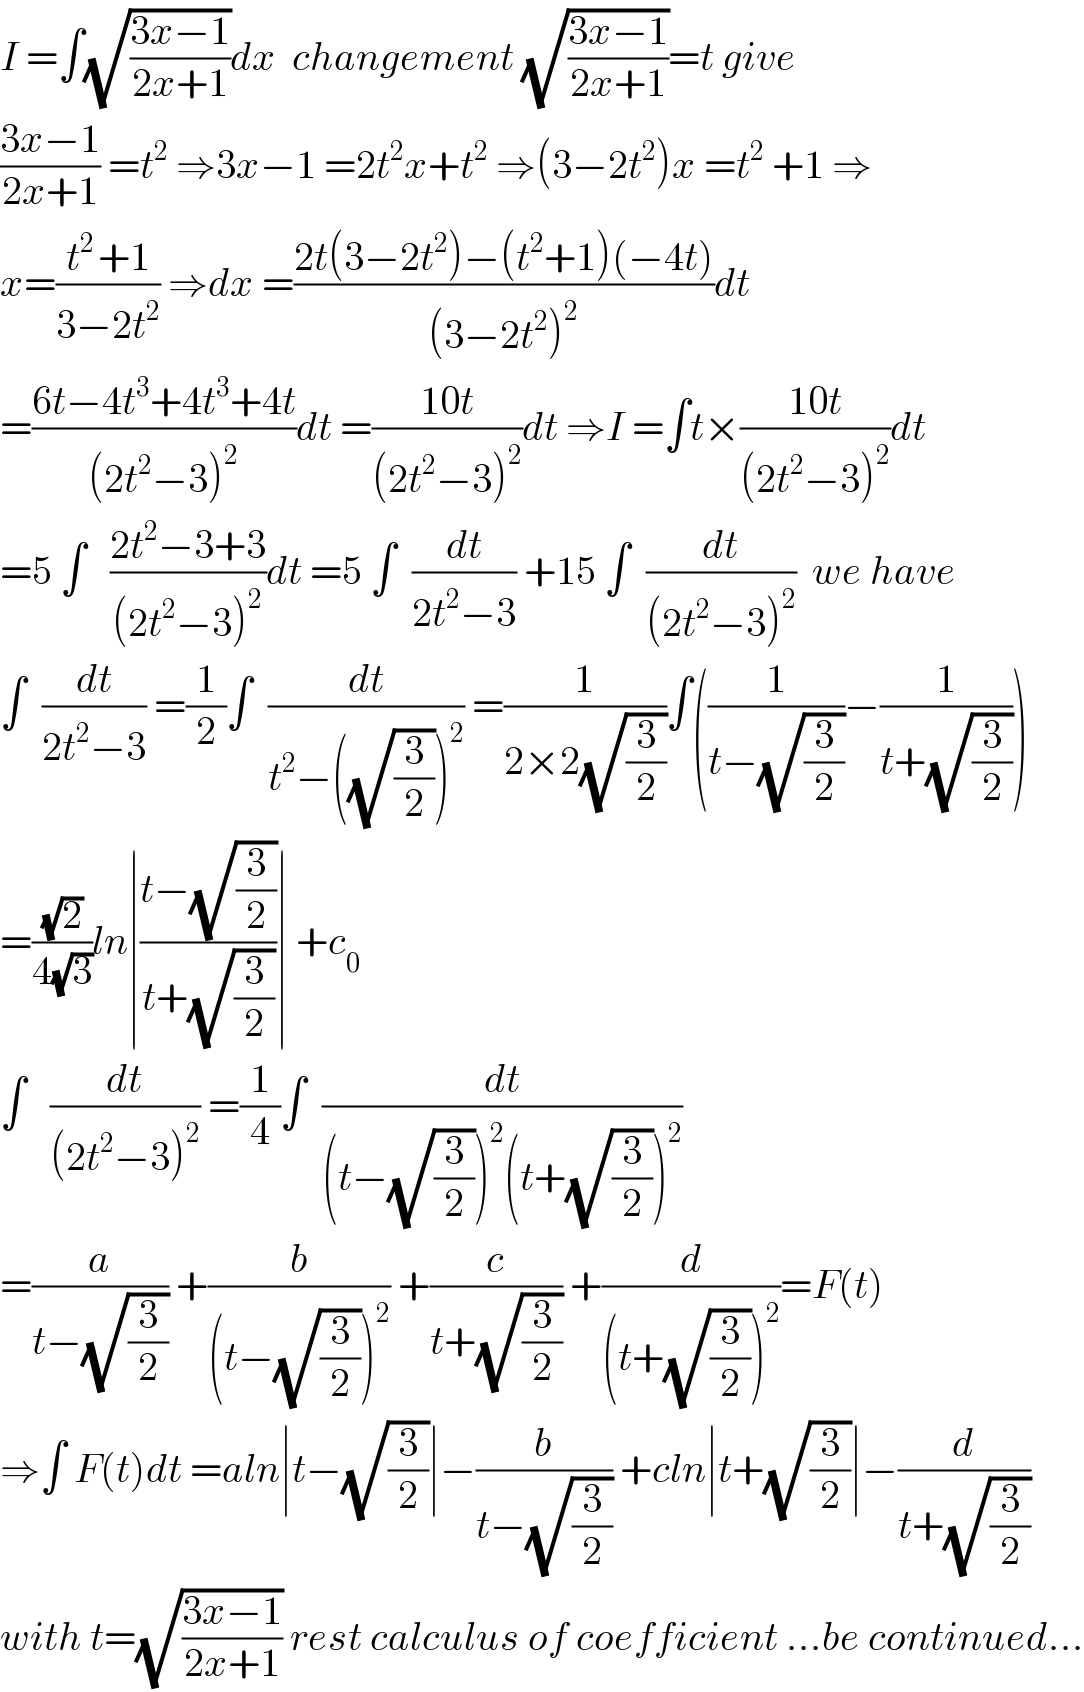 I =∫(√((3x−1)/(2x+1)))dx  changement (√((3x−1)/(2x+1)))=t give  ((3x−1)/(2x+1)) =t^2  ⇒3x−1 =2t^2 x+t^2  ⇒(3−2t^2 )x =t^2  +1 ⇒  x=((t^(2 ) +1)/(3−2t^2 )) ⇒dx =((2t(3−2t^2 )−(t^2 +1)(−4t))/((3−2t^2 )^2 ))dt  =((6t−4t^3 +4t^3 +4t)/((2t^2 −3)^2 ))dt =((10t)/((2t^2 −3)^2 ))dt ⇒I =∫t×((10t)/((2t^2 −3)^2 ))dt  =5 ∫   ((2t^2 −3+3)/((2t^2 −3)^2 ))dt =5 ∫  (dt/(2t^2 −3)) +15 ∫  (dt/((2t^2 −3)^2 ))  we have  ∫  (dt/(2t^2 −3)) =(1/2)∫  (dt/(t^2 −((√(3/2)))^2 )) =(1/(2×2(√(3/2))))∫((1/(t−(√(3/2))))−(1/(t+(√(3/2)))))  =((√2)/(4(√3)))ln∣((t−(√(3/2)))/(t+(√(3/2))))∣ +c_0   ∫   (dt/((2t^2 −3)^2 )) =(1/4)∫  (dt/((t−(√(3/2)))^2 (t+(√(3/2)))^2 ))  =(a/(t−(√(3/2)))) +(b/((t−(√(3/2)))^2 )) +(c/(t+(√(3/2)))) +(d/((t+(√(3/2)))^2 ))=F(t)  ⇒∫ F(t)dt =aln∣t−(√(3/2))∣−(b/(t−(√(3/2)))) +cln∣t+(√(3/2))∣−(d/(t+(√(3/2))))  with t=(√((3x−1)/(2x+1))) rest calculus of coefficient ...be continued...  